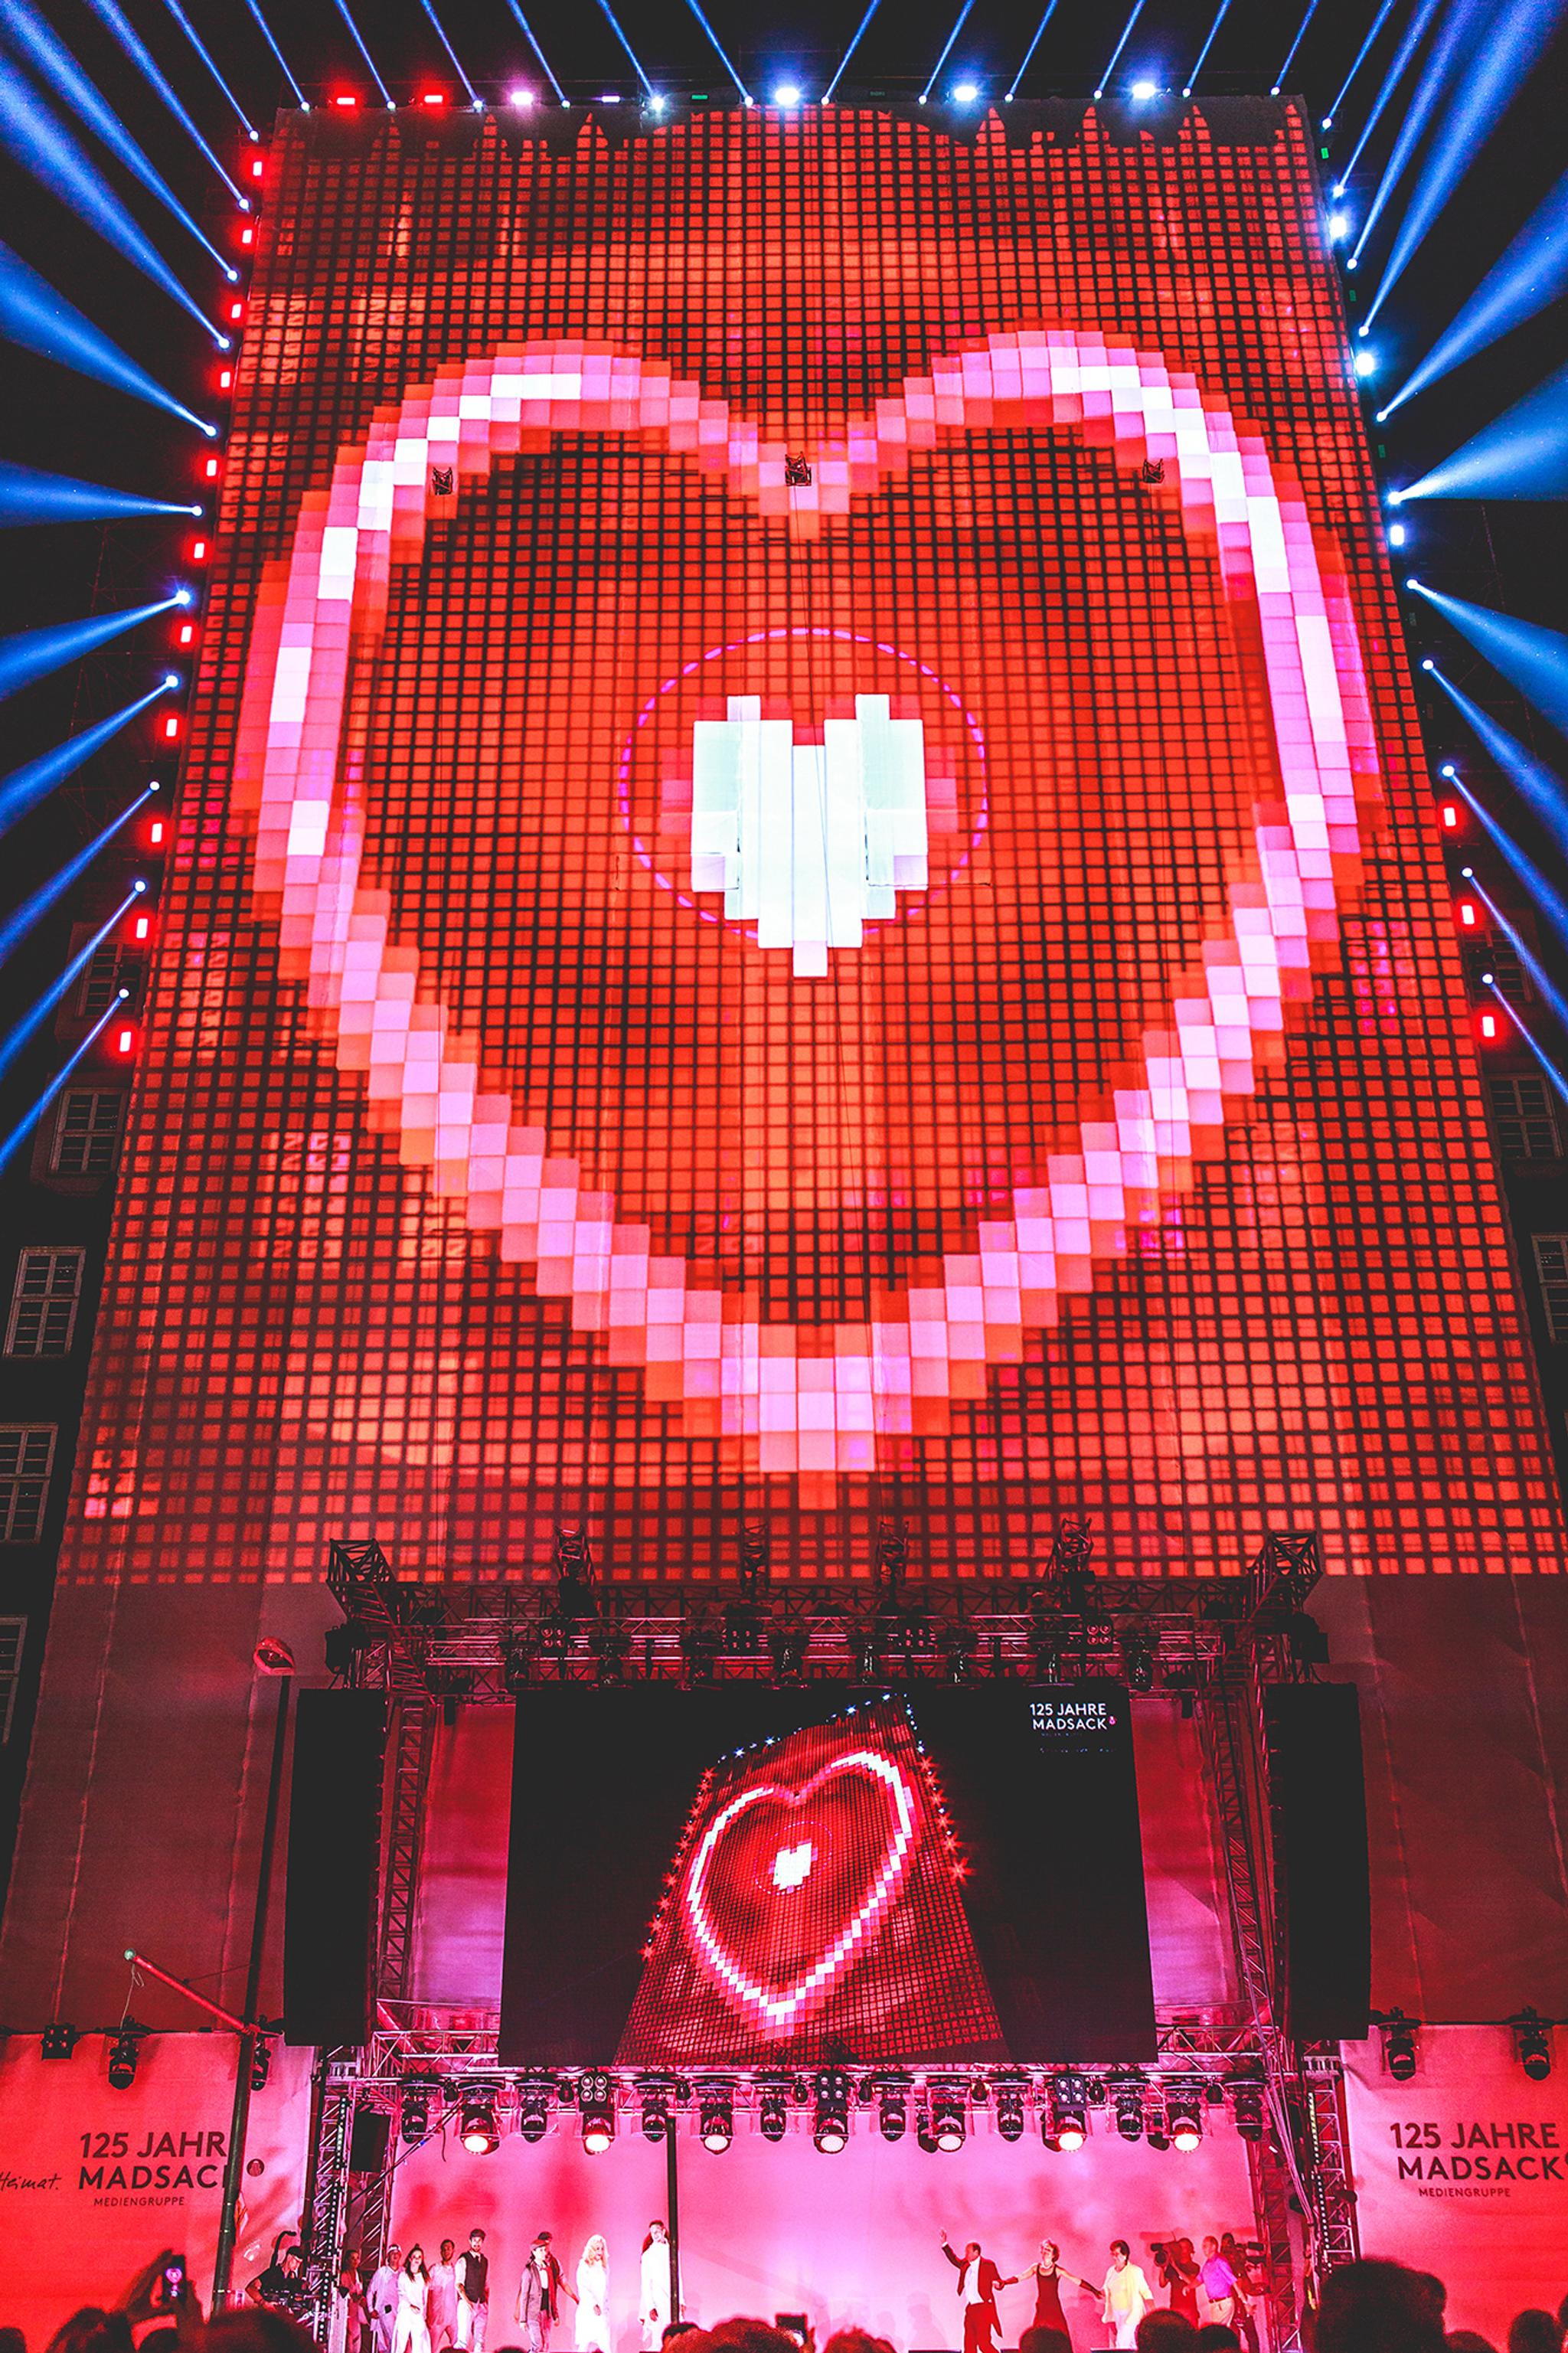 Video mapping of a bright, pink heart on a large vertical stage. A large crowd watches a musician outdoors.